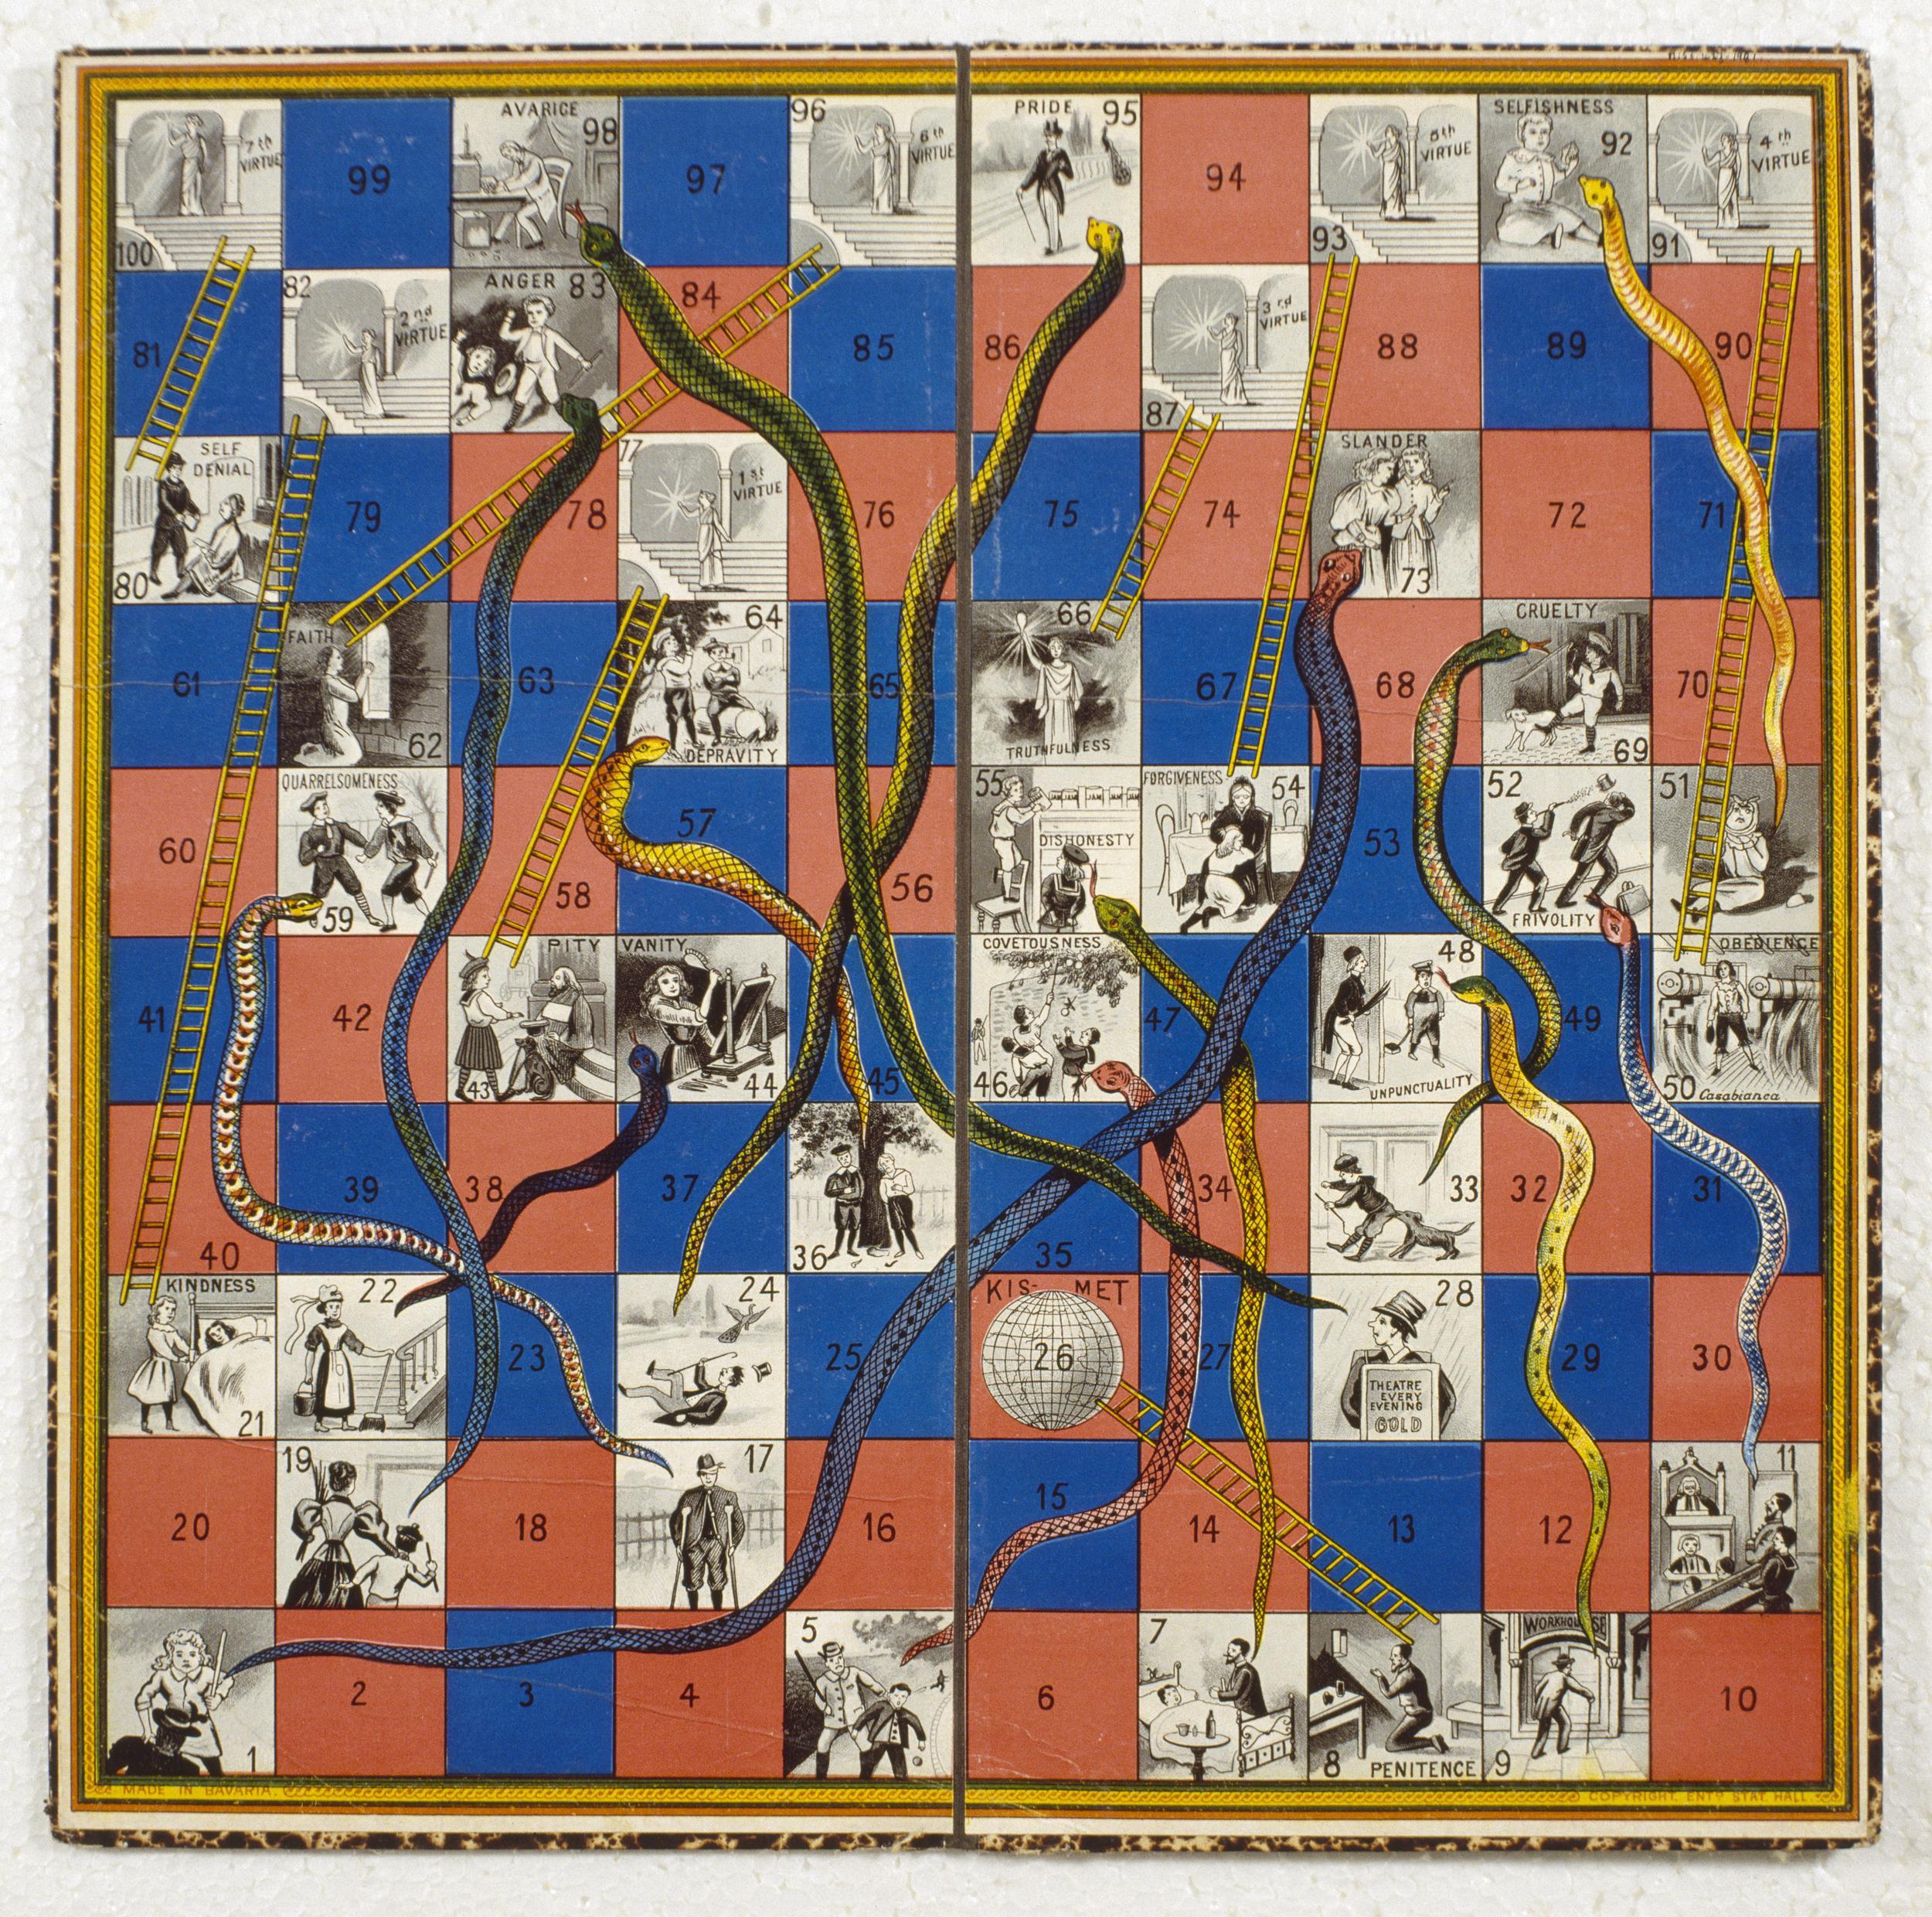 eReading Karma in Snakes and Ladders: two South Asian game boards in the  British Library collections - Asian and African studies blog